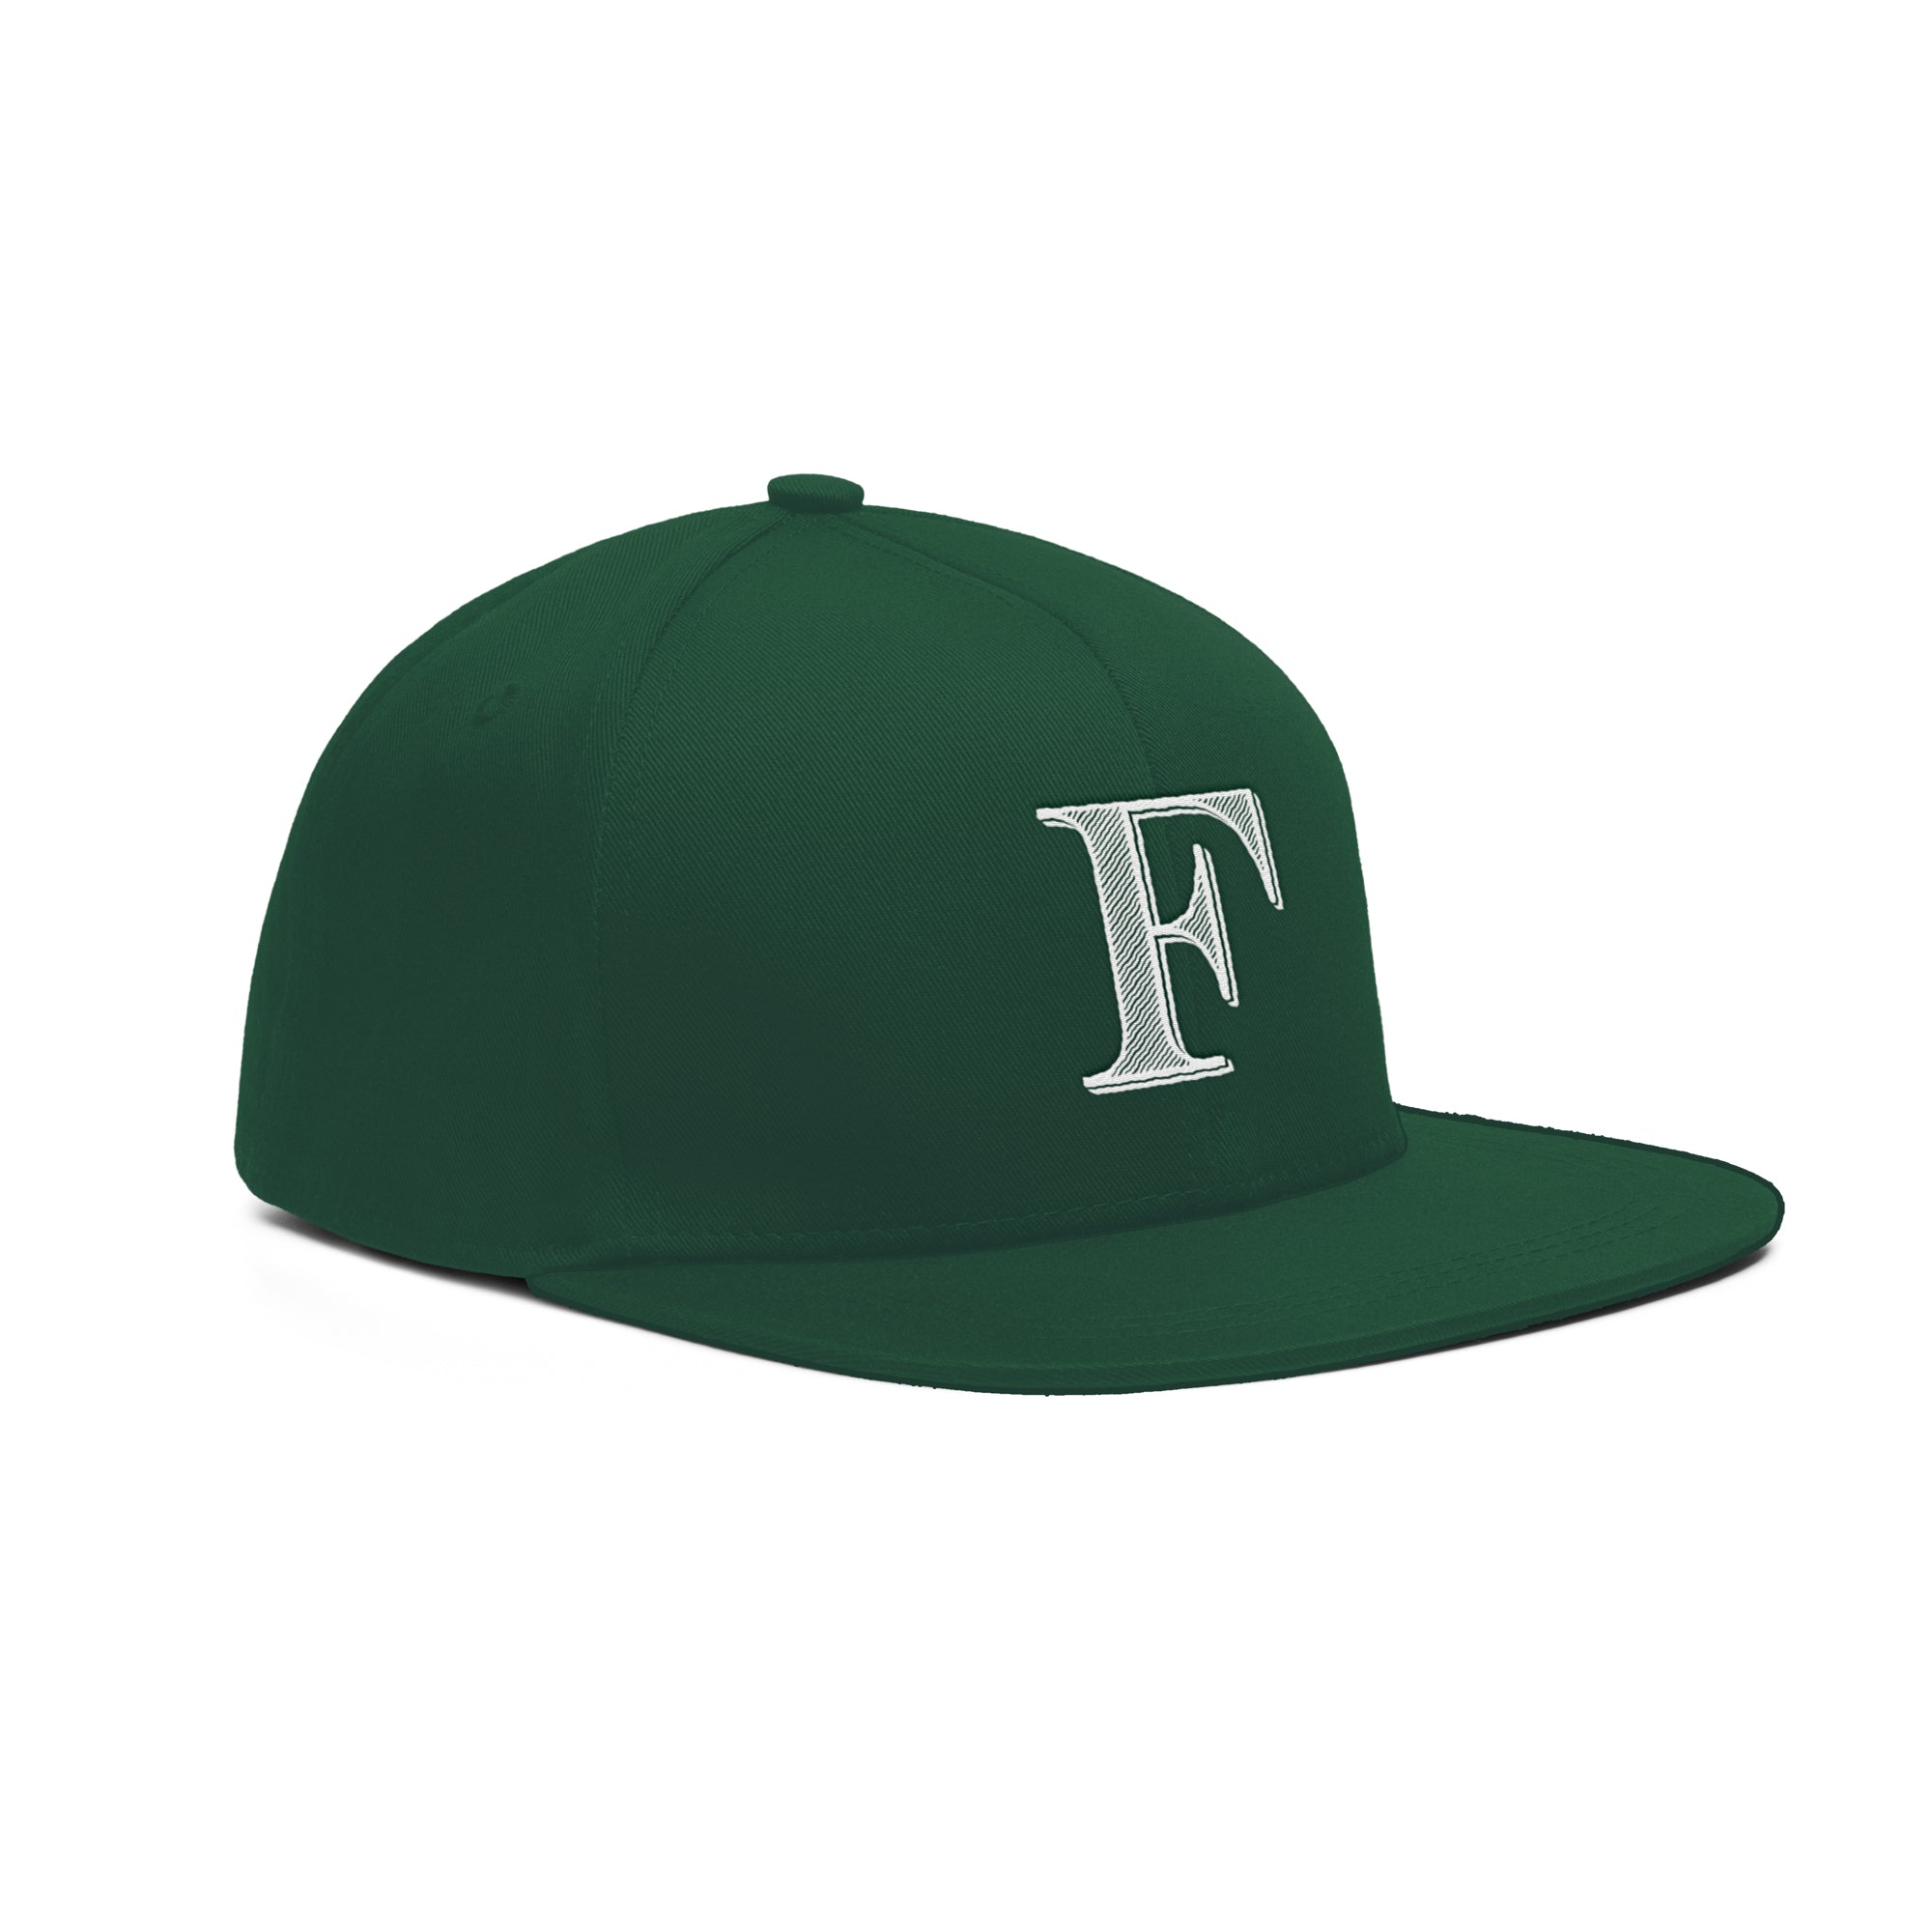 Franklin's Hat (Classic)